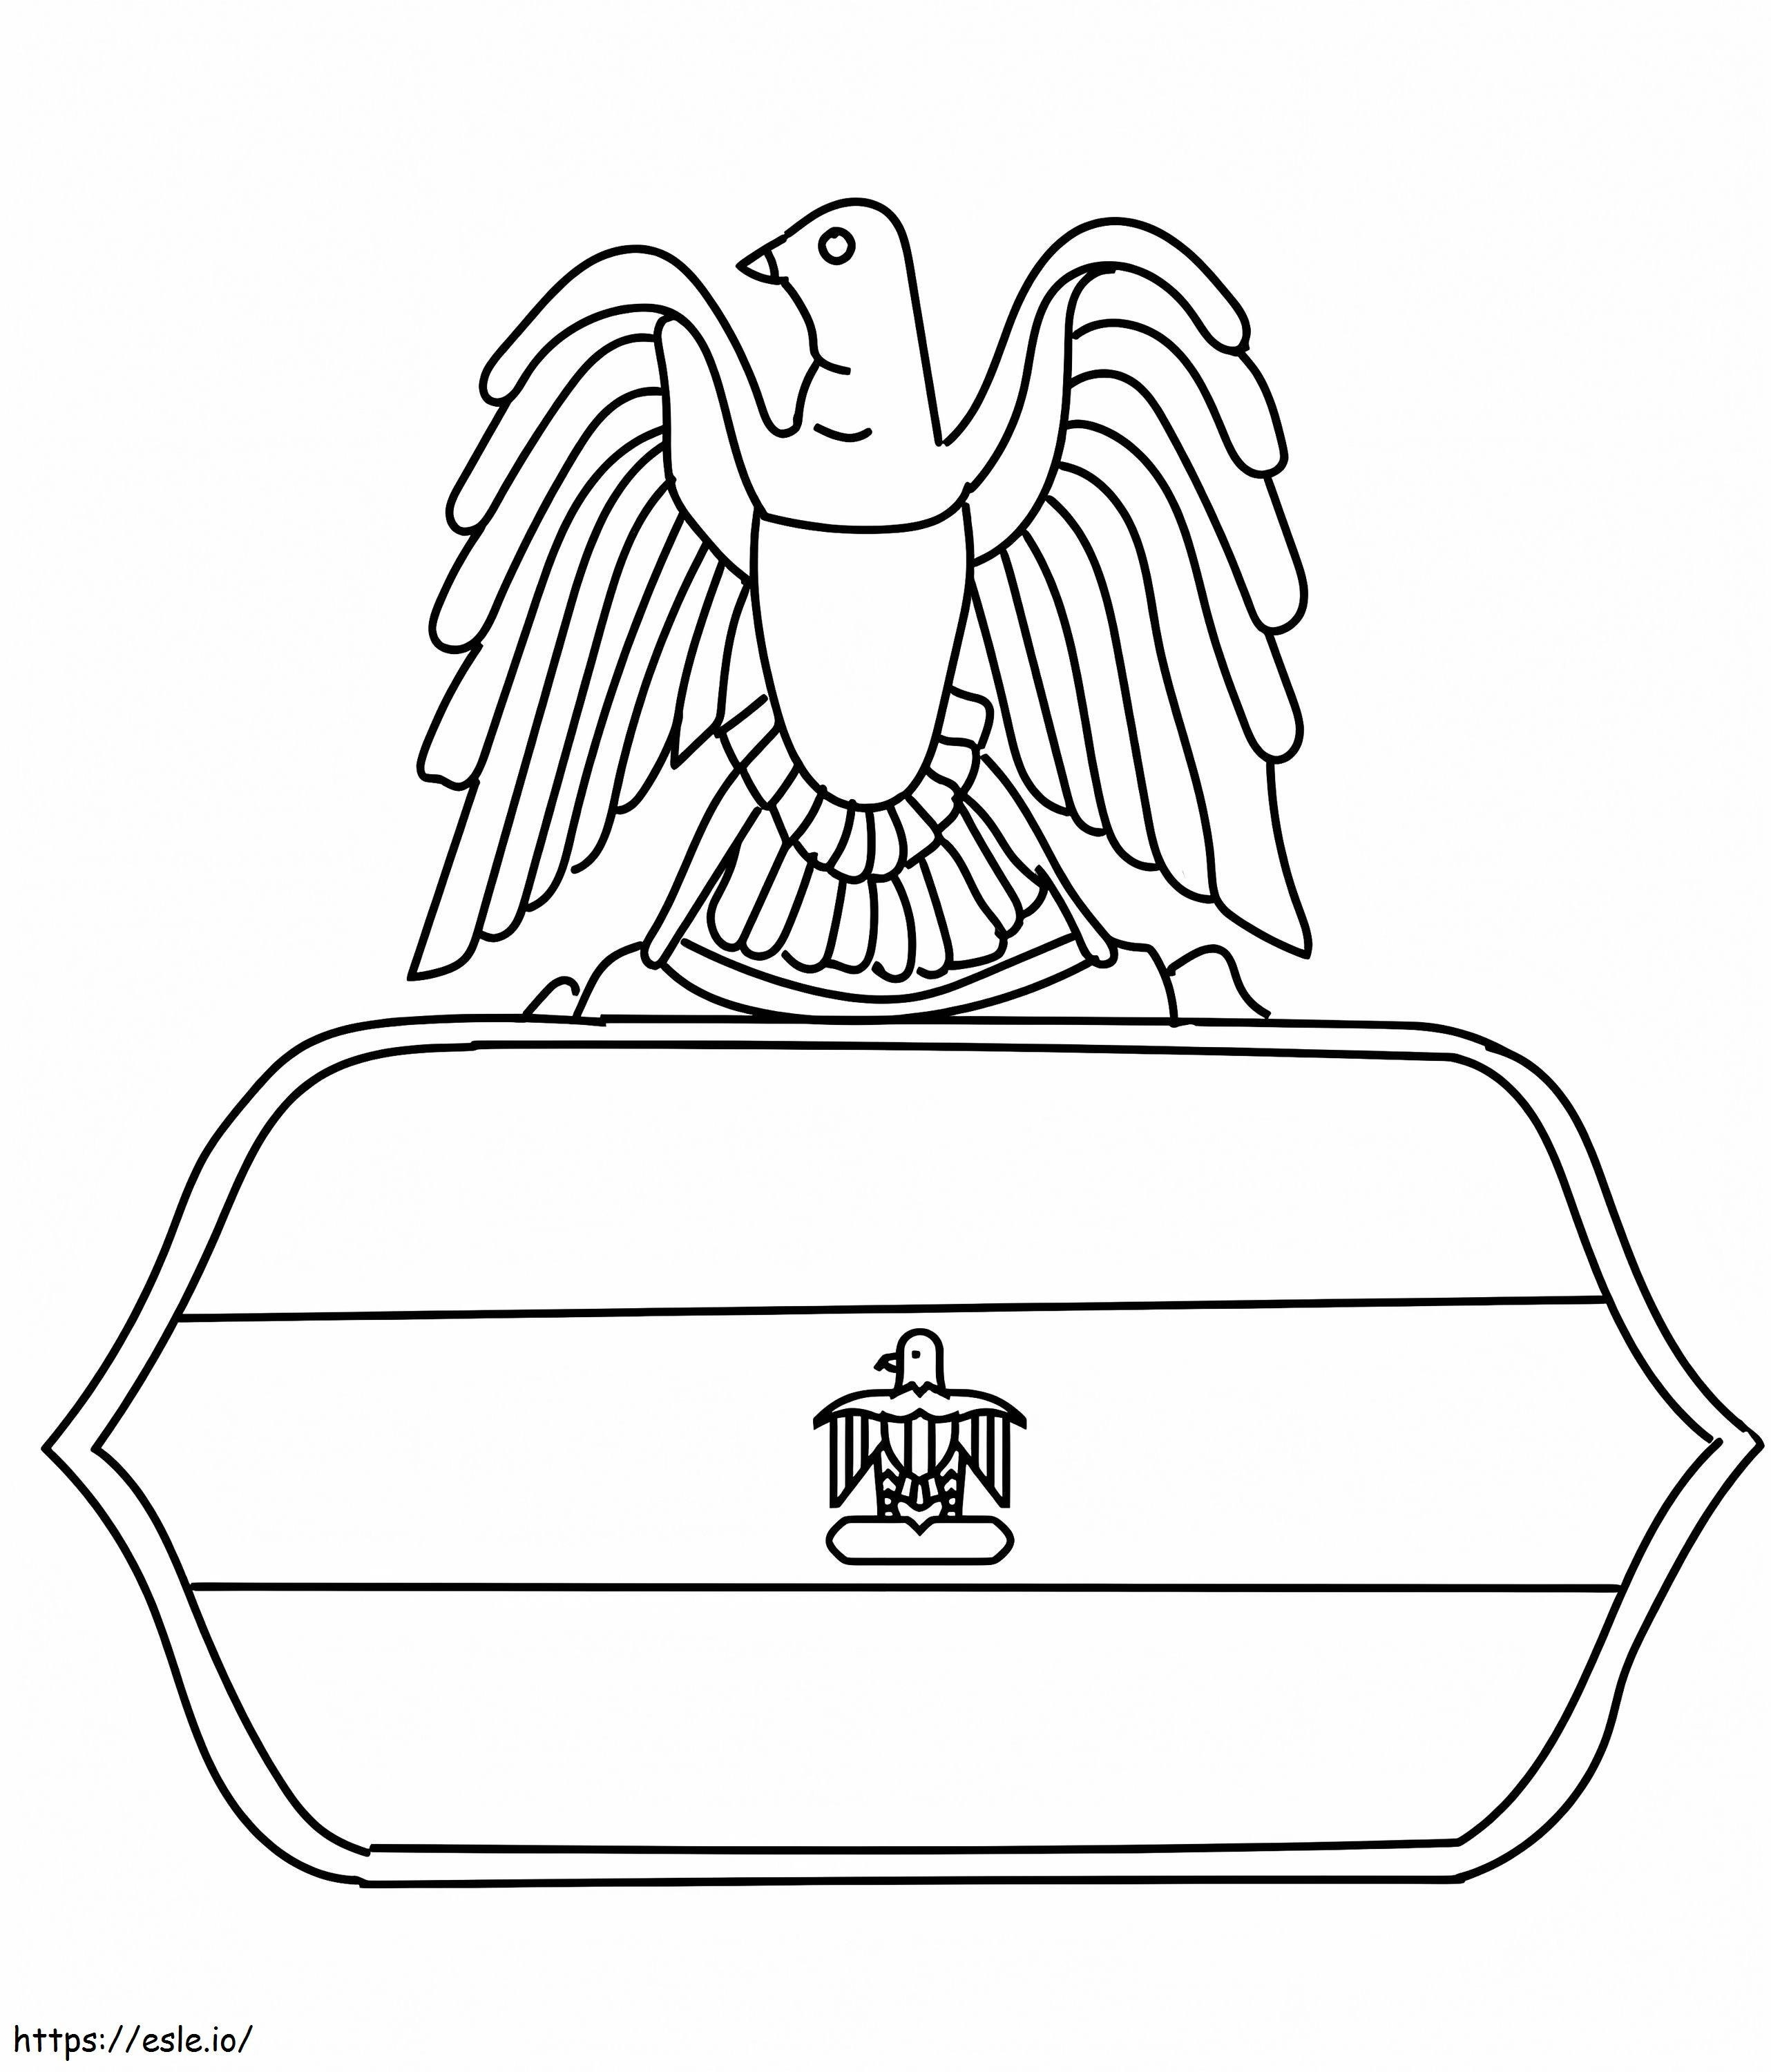 Eagle Of Saladin coloring page